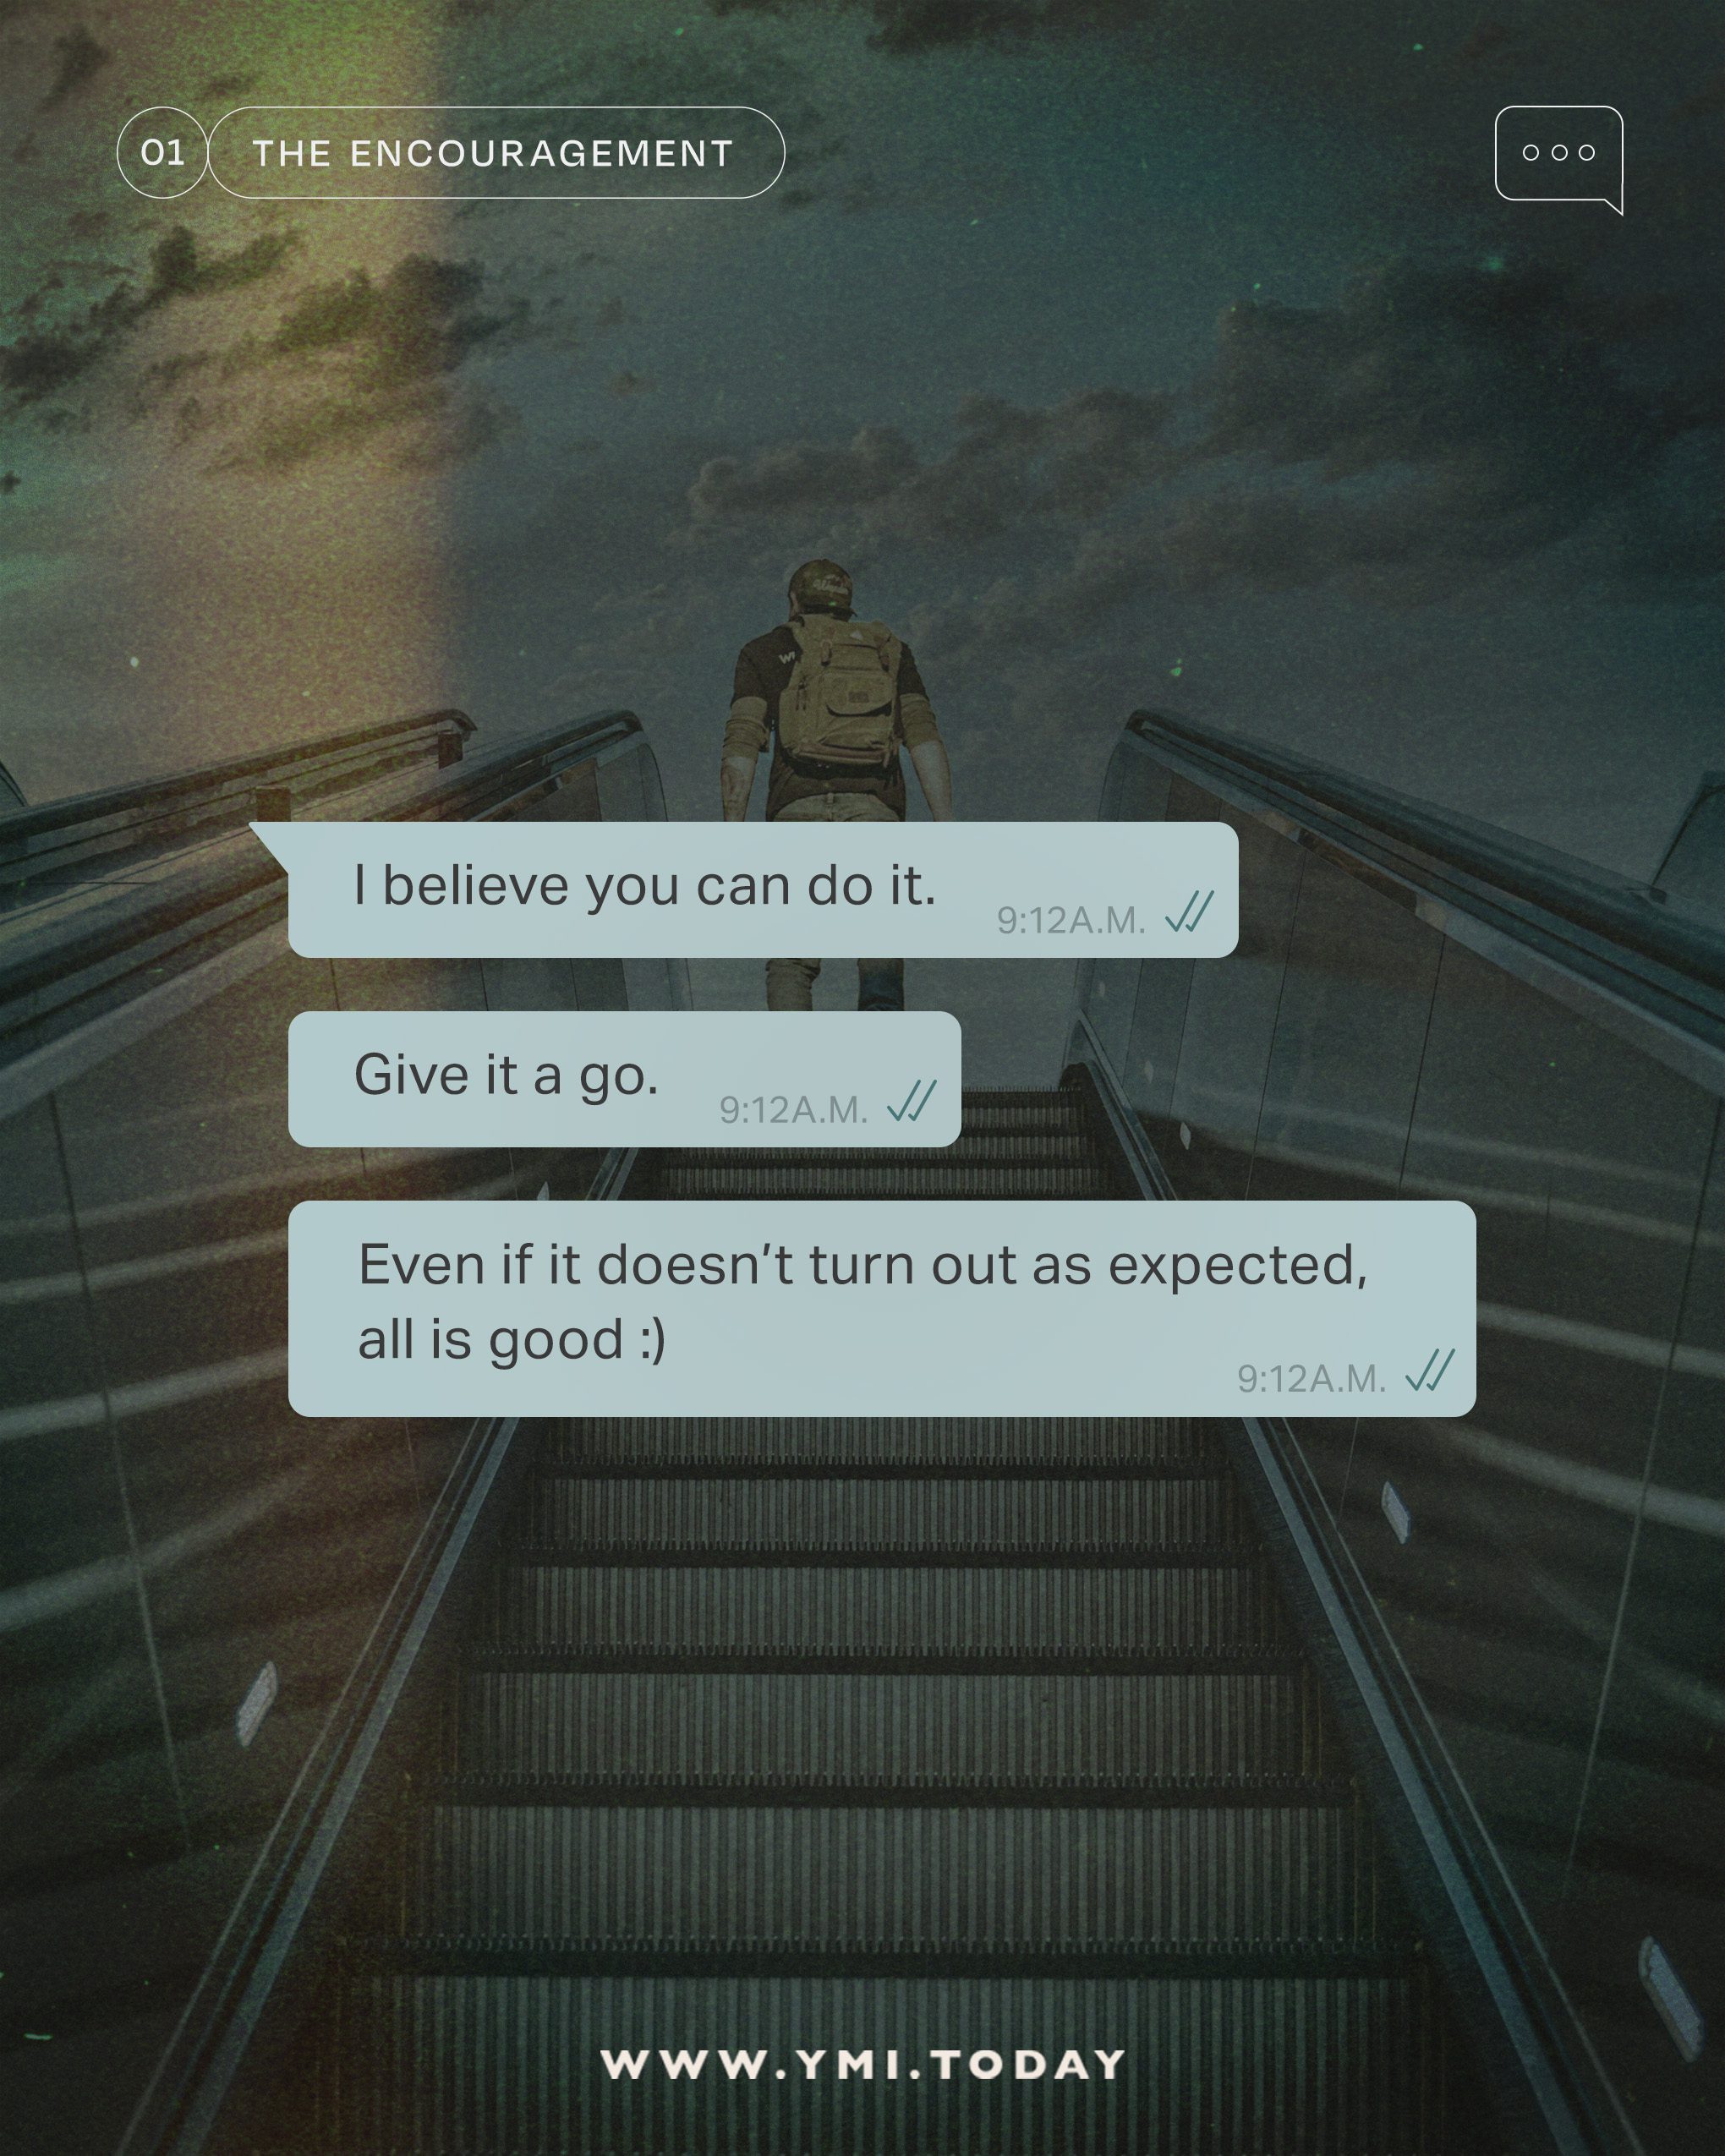 Man walking on top of escalator with encouraging messages overlay saying "I believe you can do it. Give it a go. Even if it doesn’t turn out as expected, all is good.”